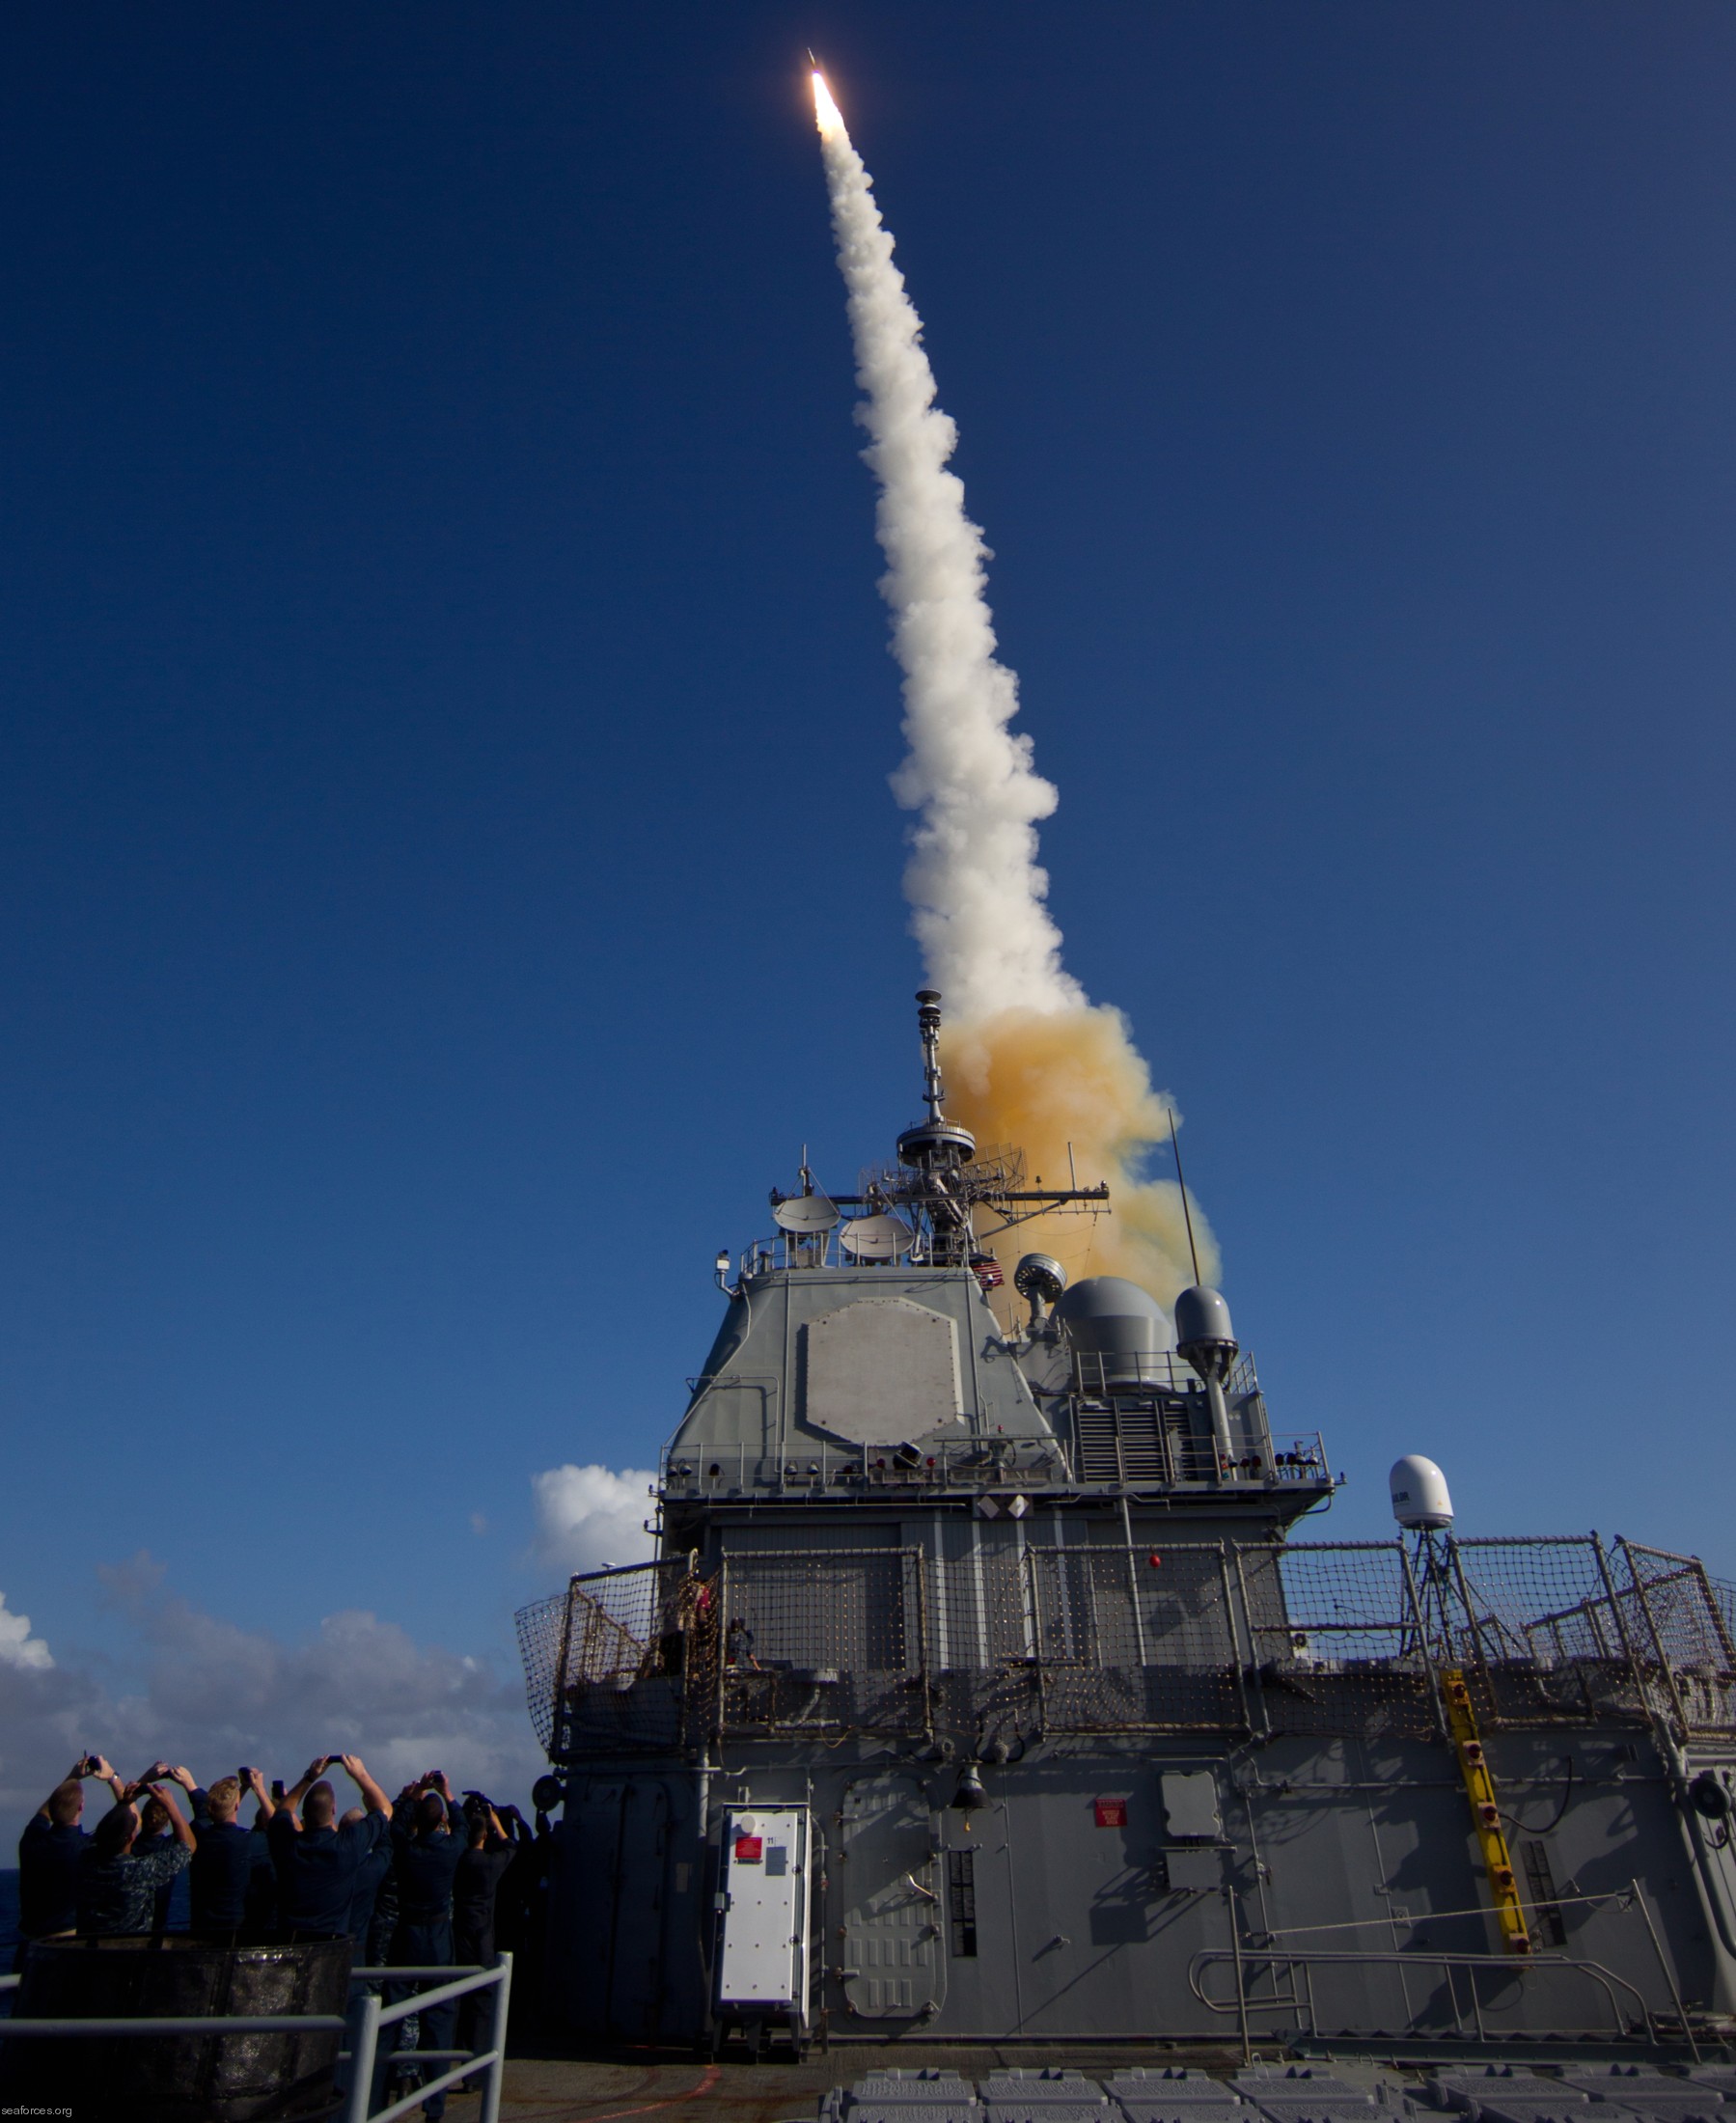 cg-70 uss lake erie ticonderoga class guided missile cruiser navy 33 standard missile launch sm-3